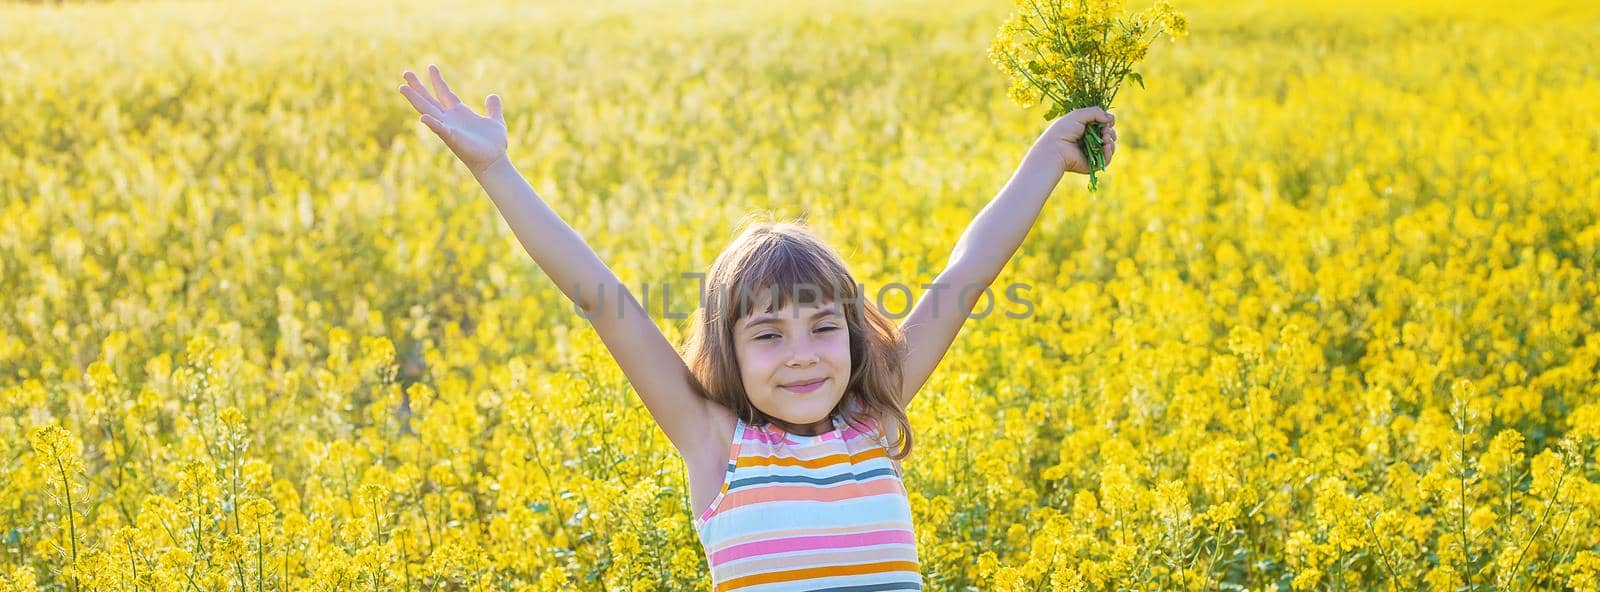 A child in a yellow field, mustard blooms. Selective focus.